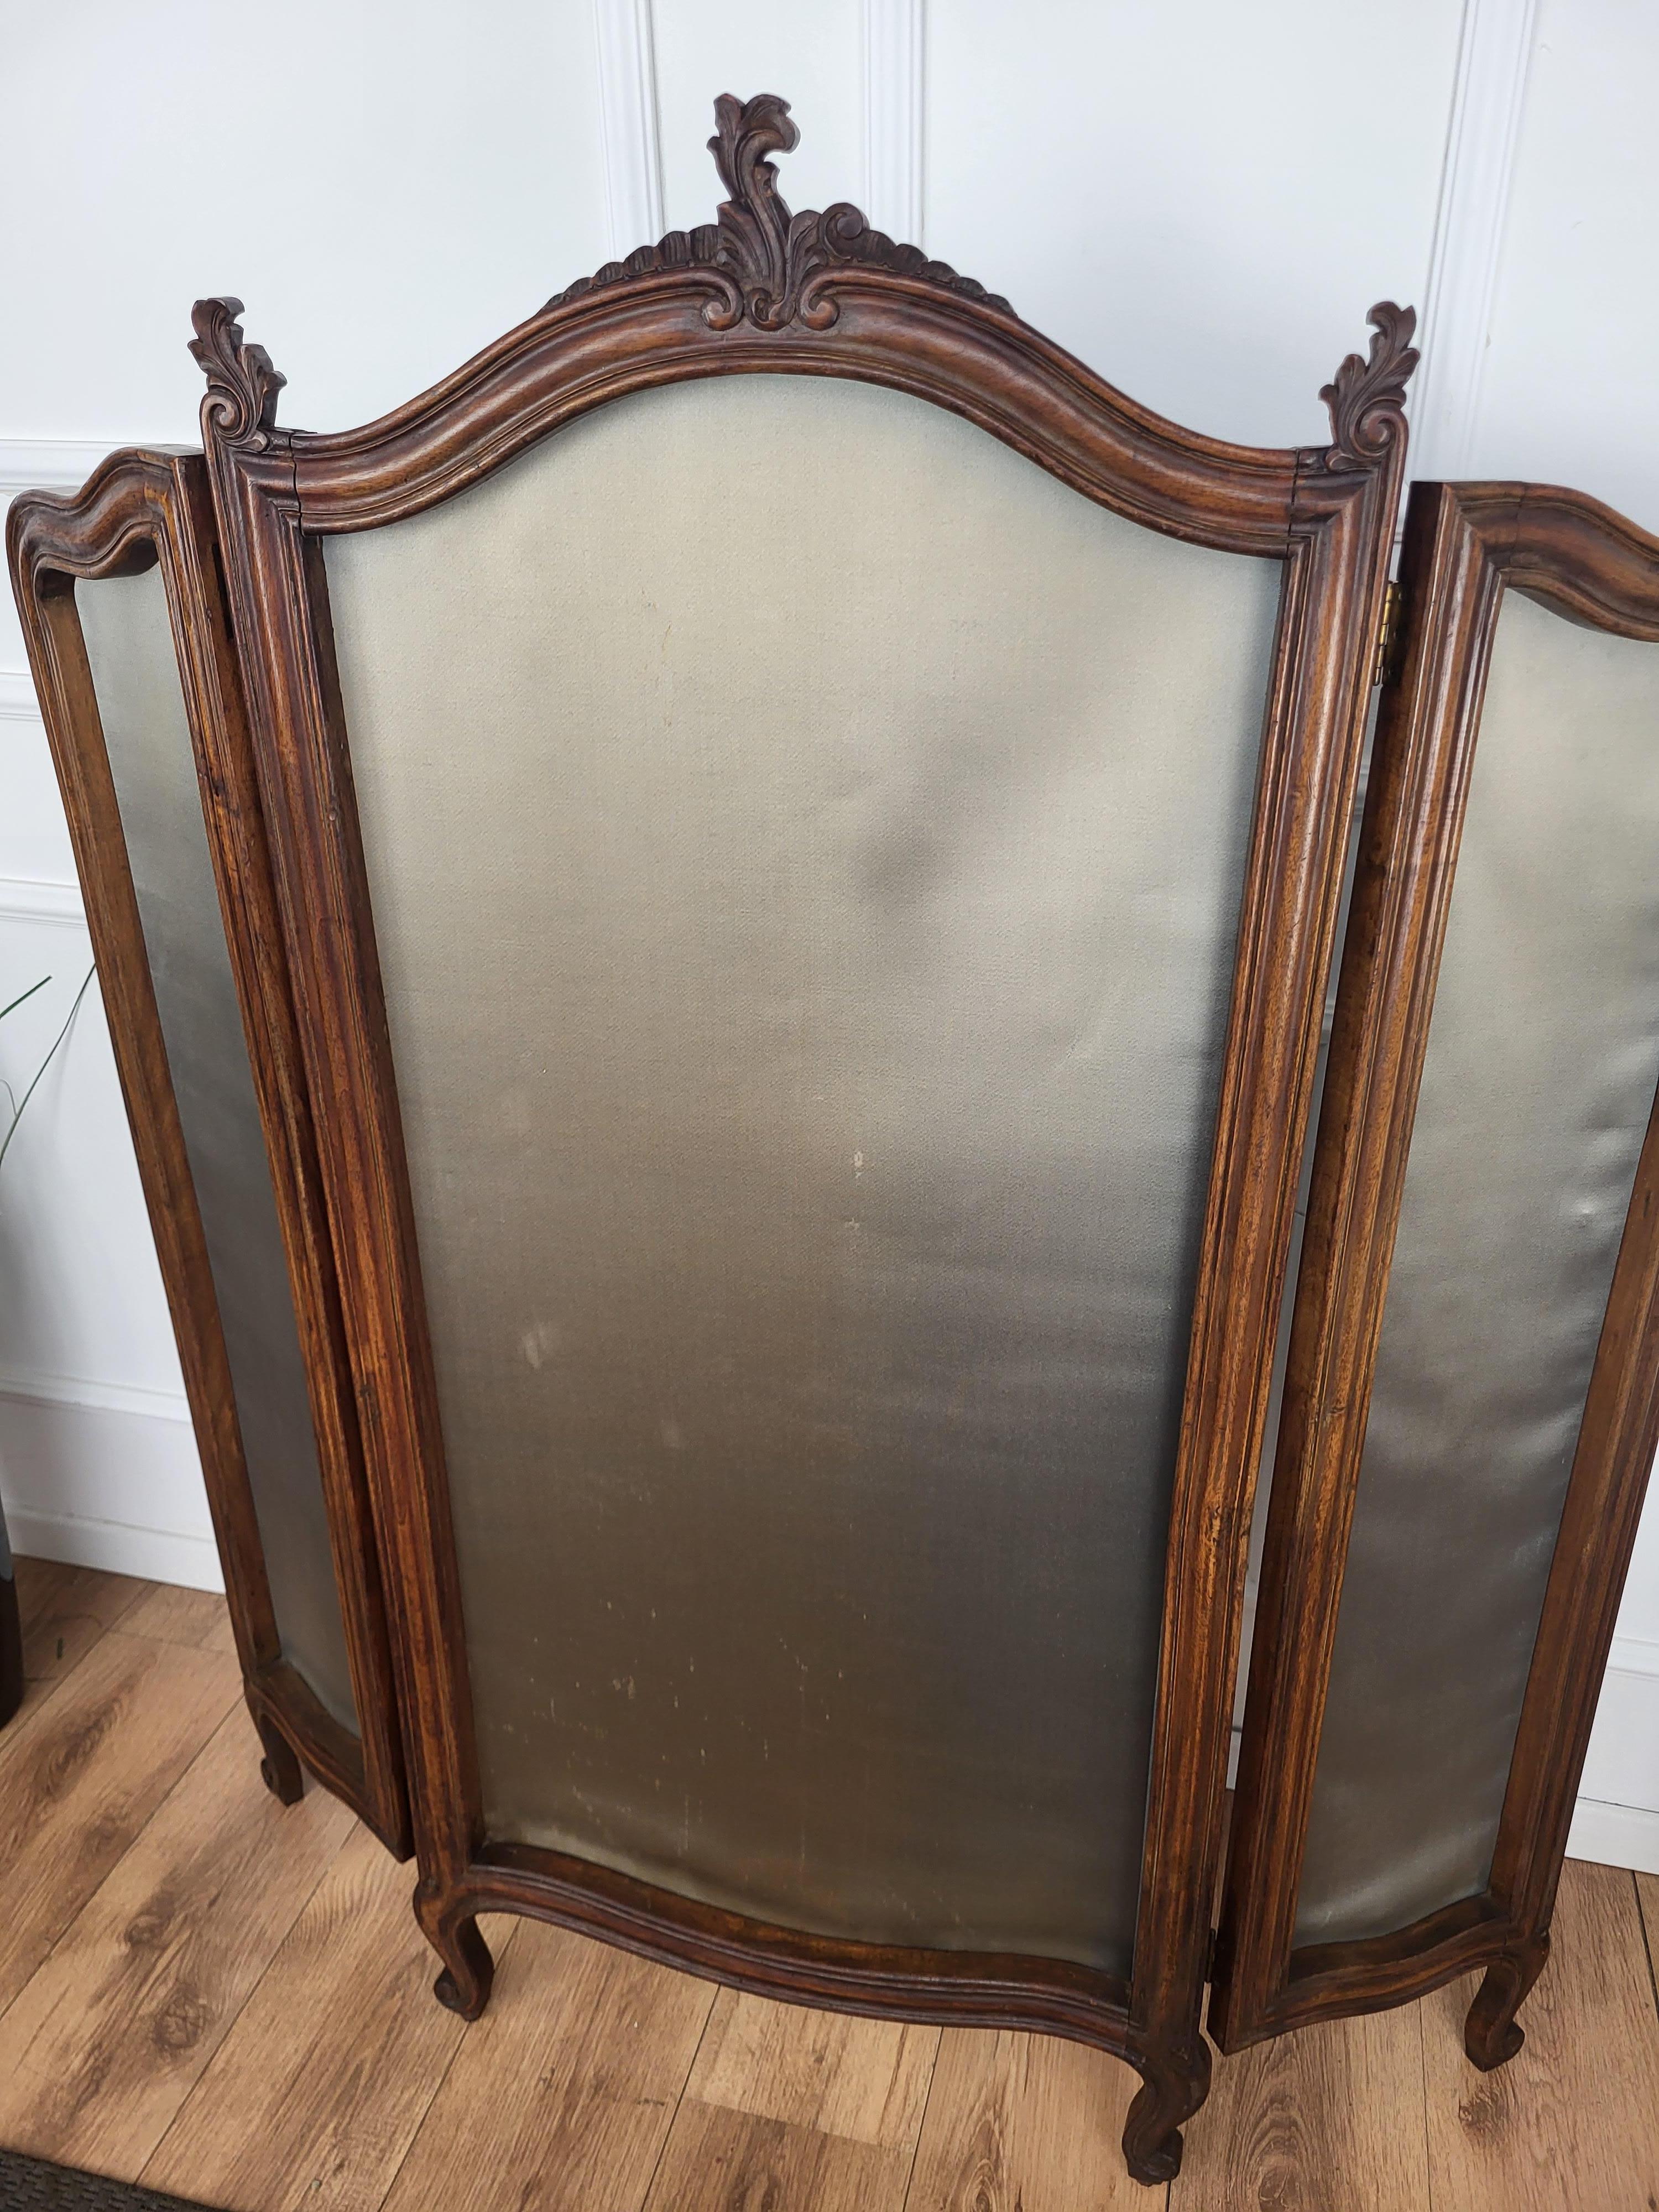 Antique Italian Classical Carved Wood Fabric 3 Panel Folding Screen Room Divider In Good Condition For Sale In Carimate, Como